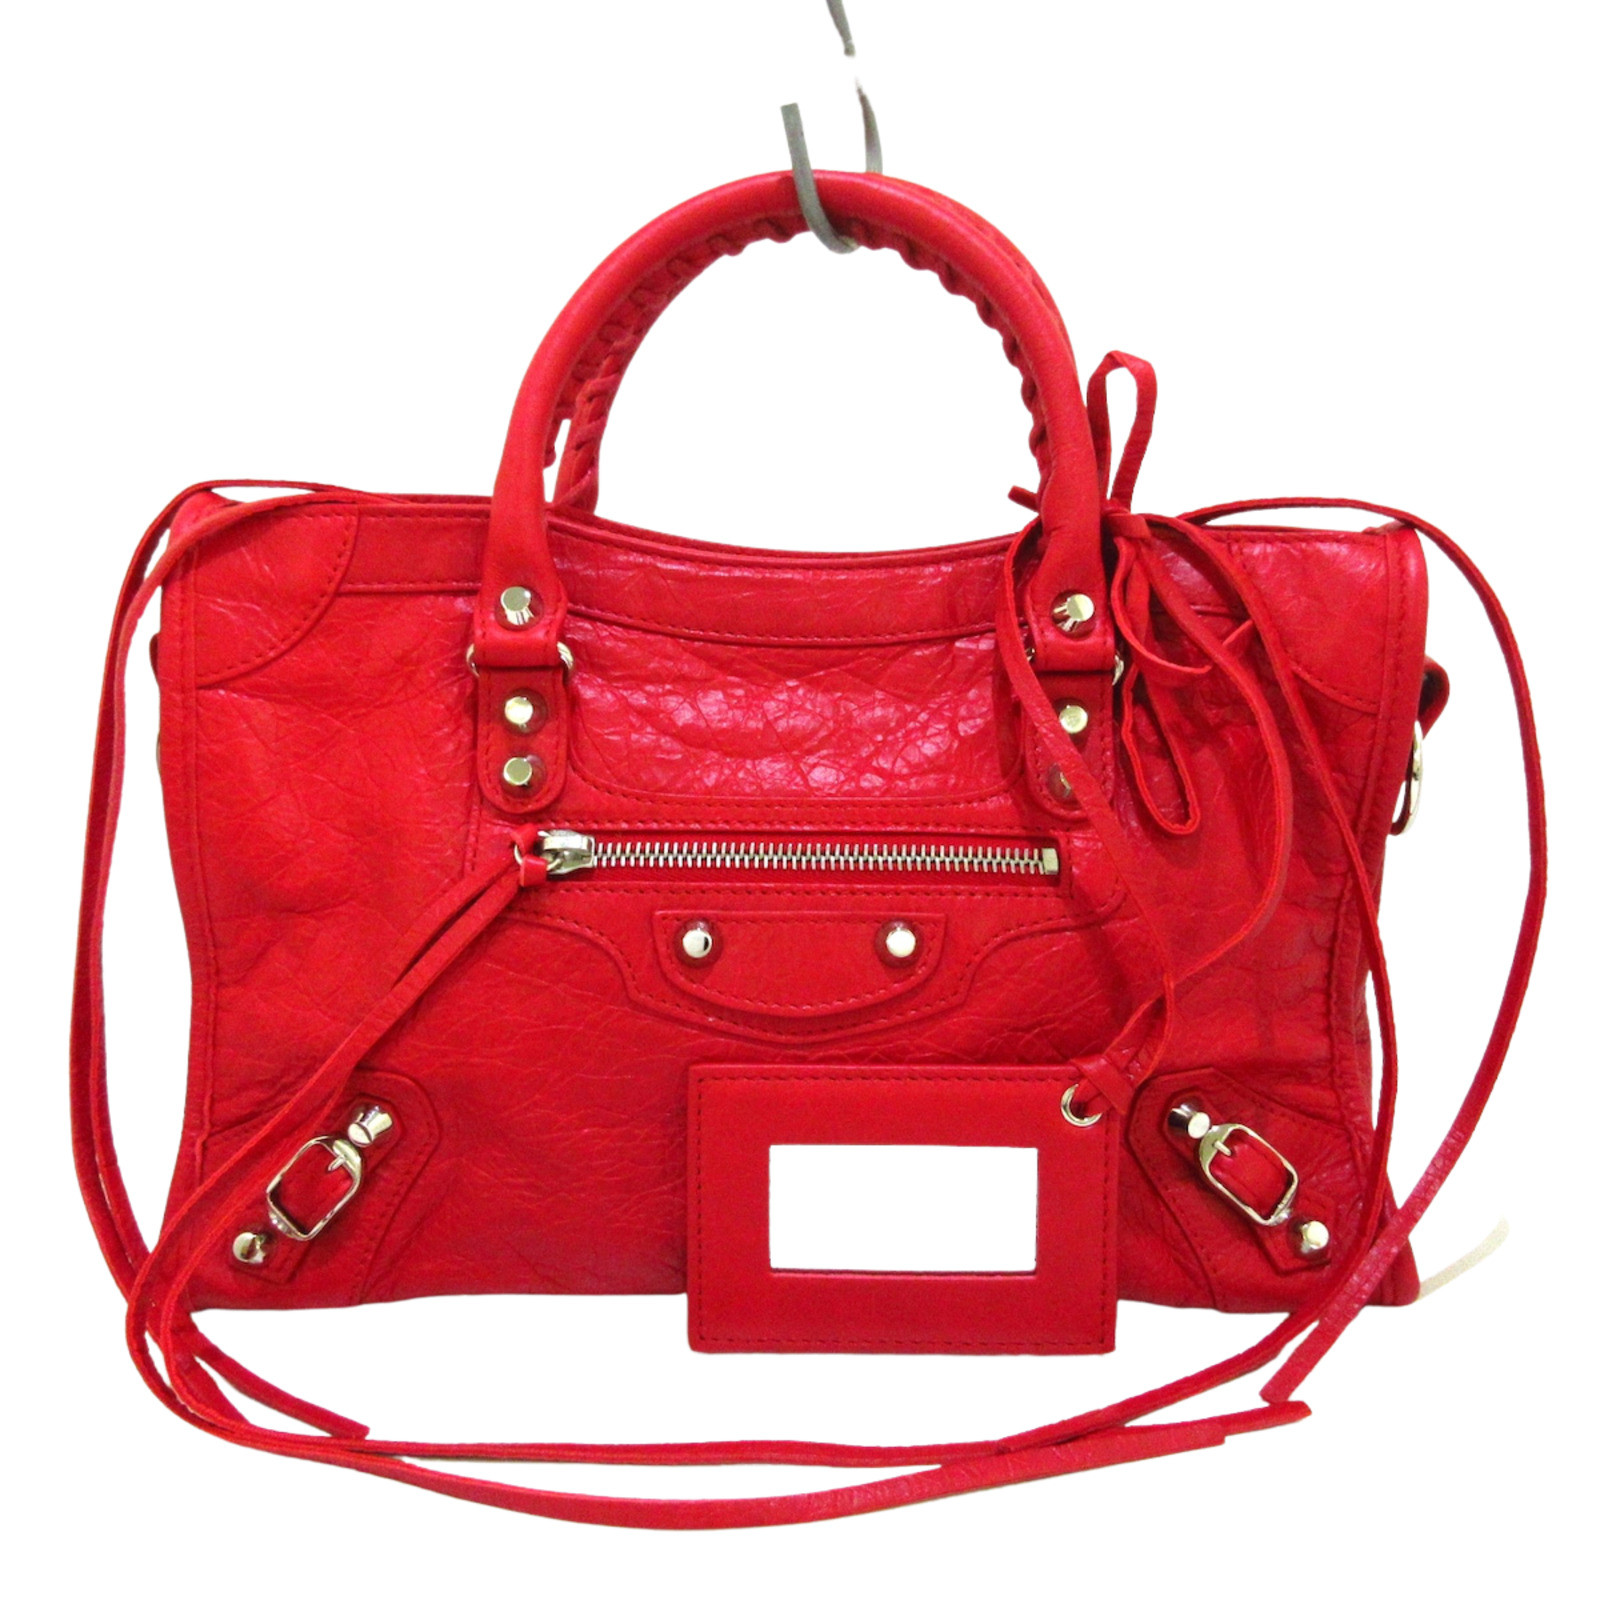 Balenciaga City Bag Leather in Red - Second Hand Balenciaga City Bag  Leather in Red buy used for 1355€ (6125919)